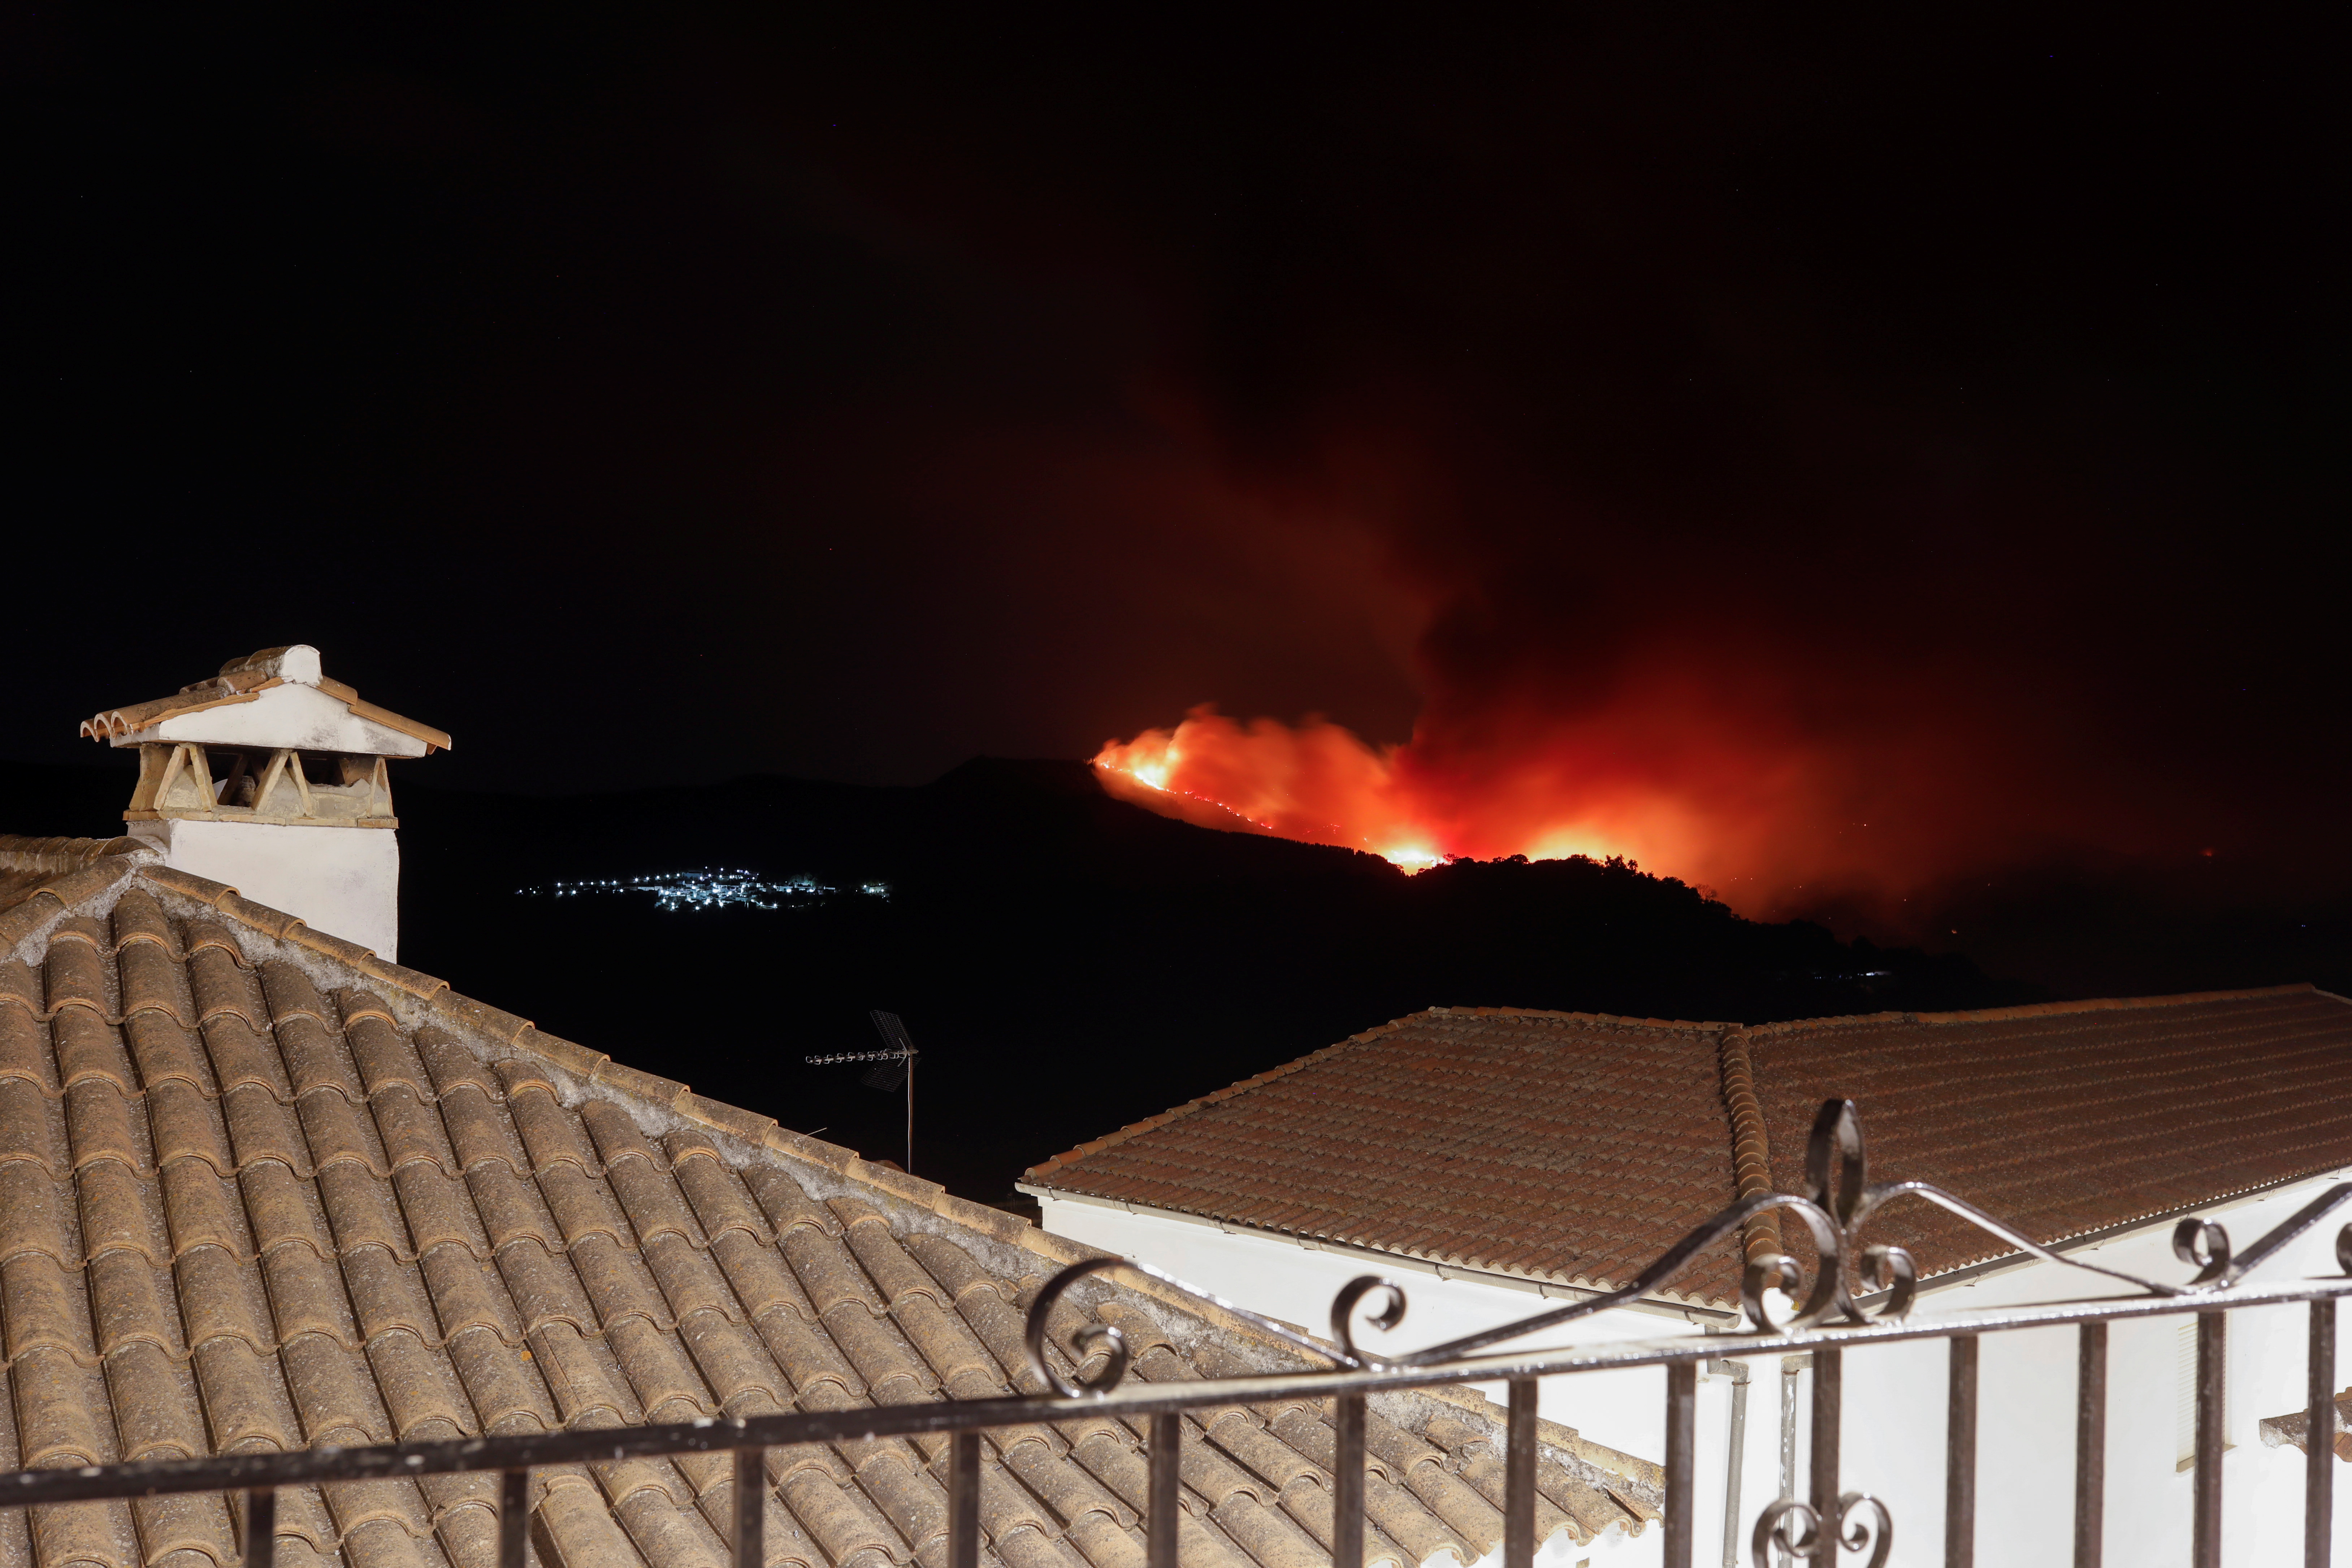 A wildfire is seen from a balcony near the town of Pujerra, which was evacuated, in Cartajima, near Estepona, Spain, September 12, 2021. REUTERS/Jon Nazca